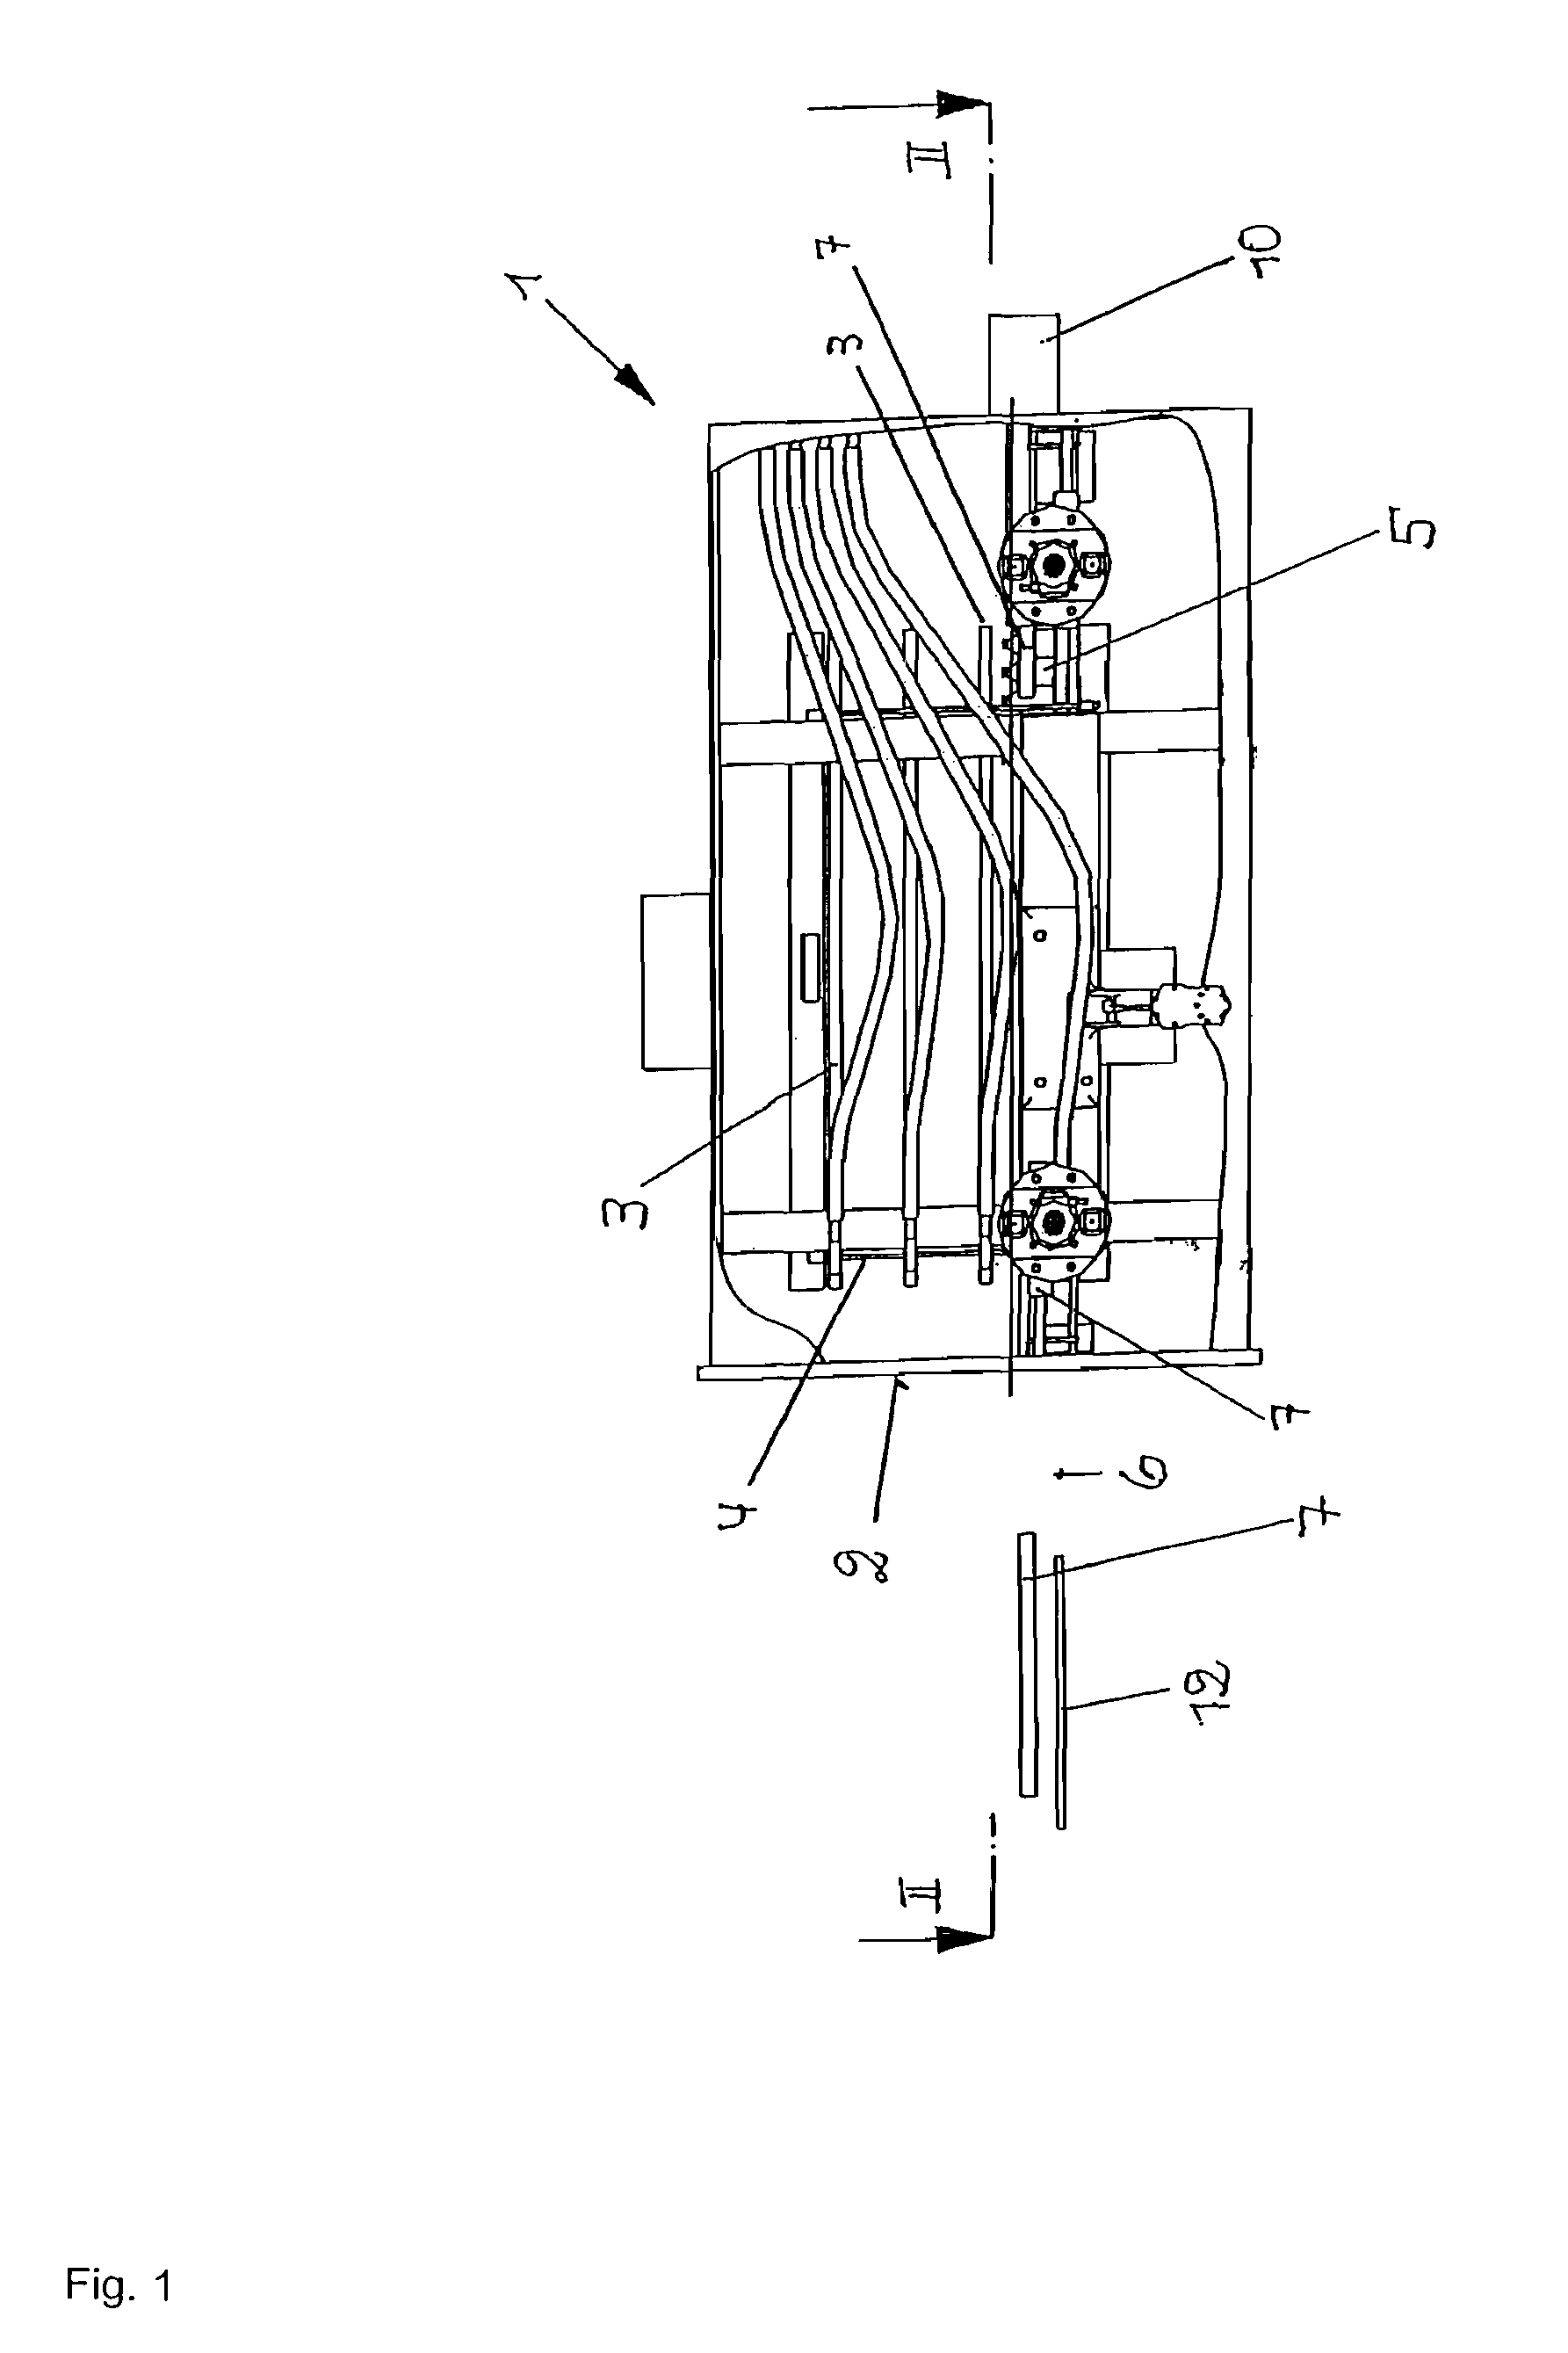 Device for loading and unloading a freeze drying system